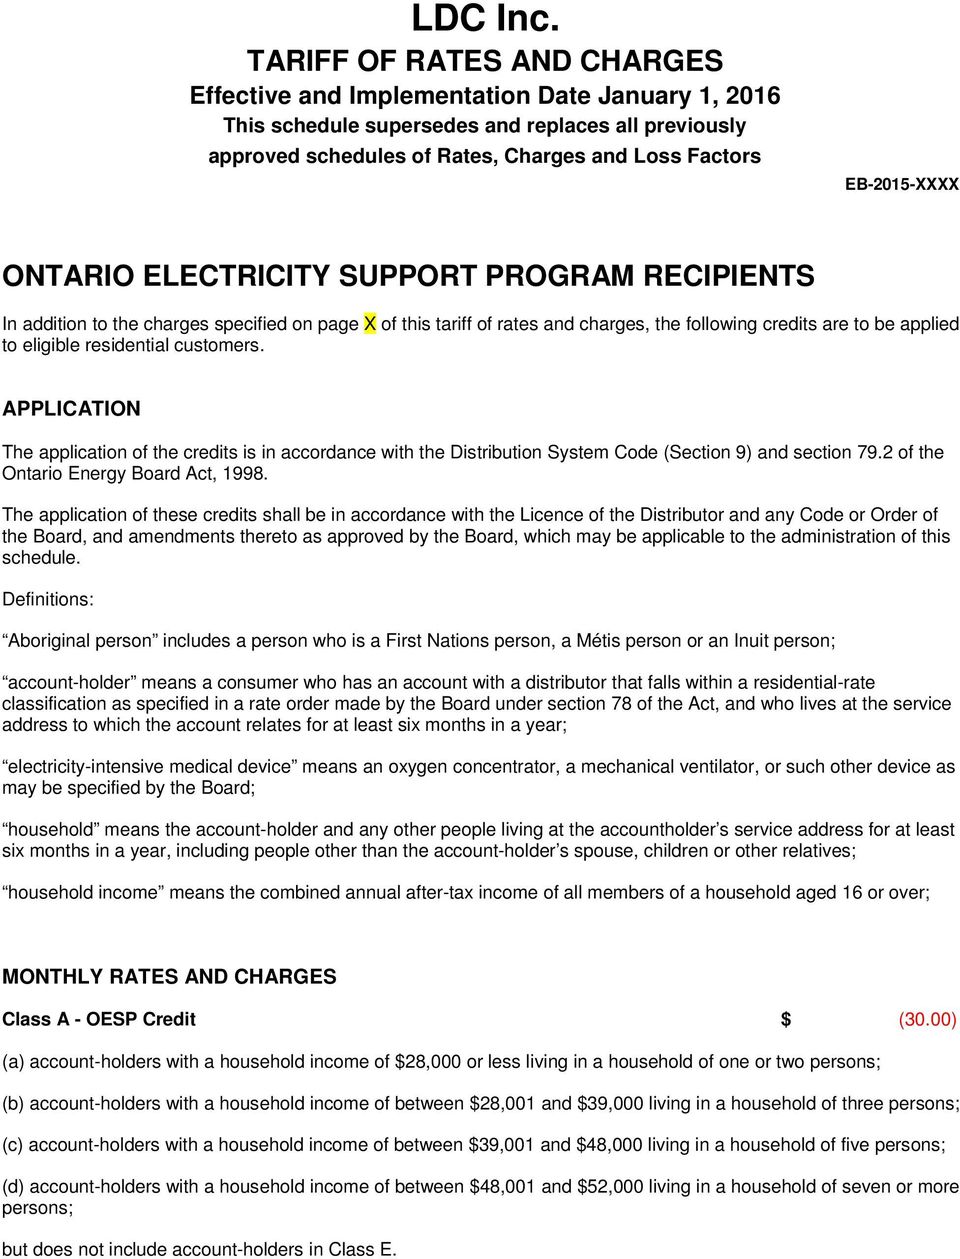 ONTARIO ELECTRICITY SUPPORT PROGRAM RECIPIENTS In addition to the charges specified on page X of this tariff of rates and charges, the following credits are to be applied to eligible residential